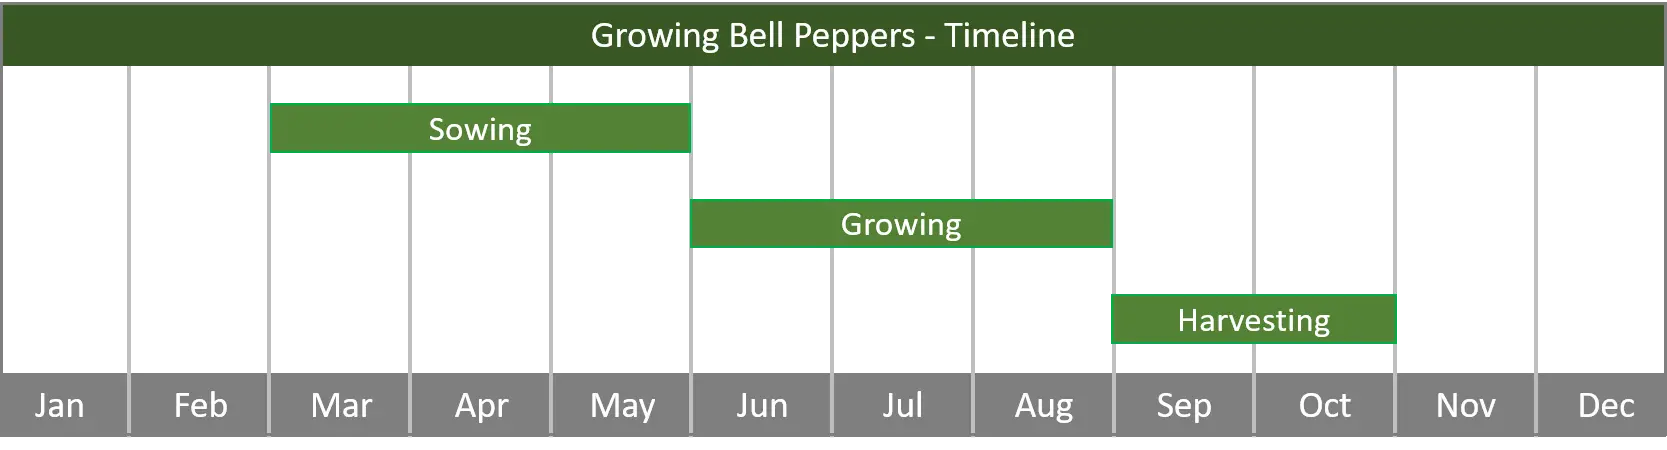 how to grow bell peppers from seed to harvest at home timeline